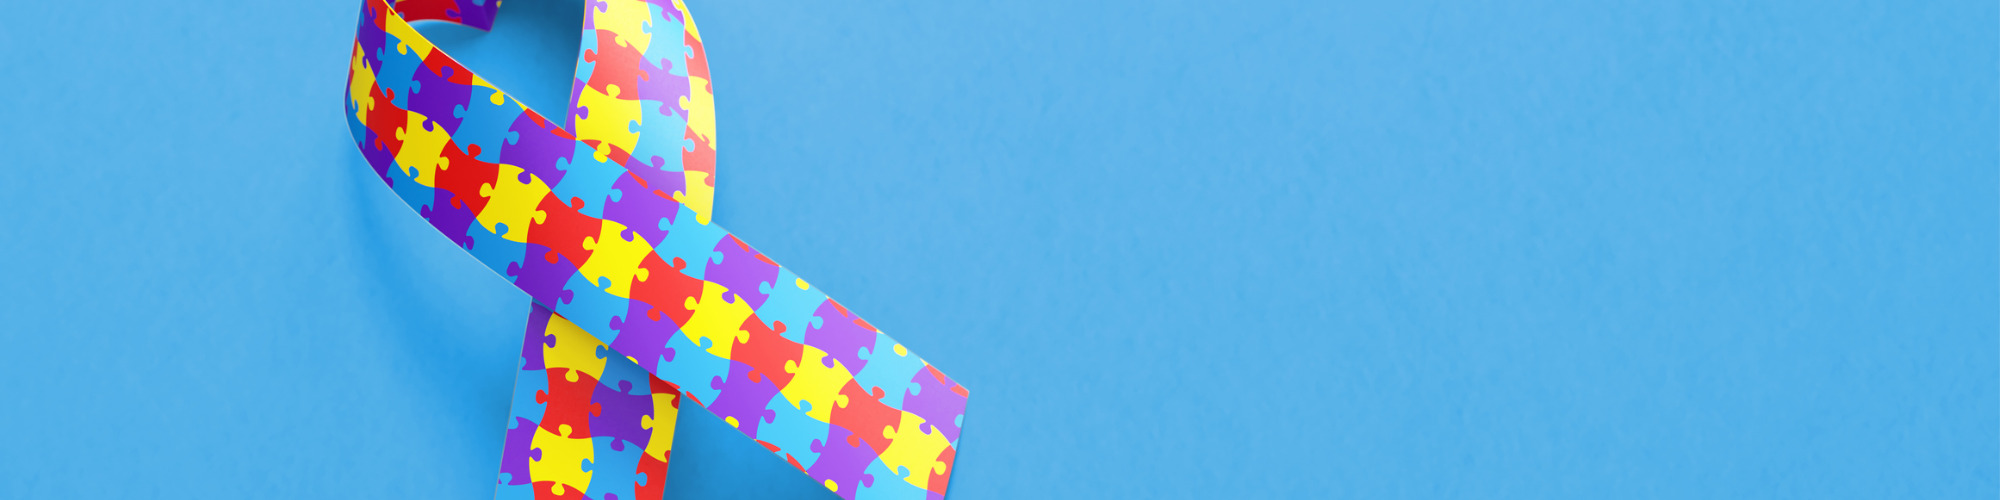 Supporting & Understanding Autistic People in Employment - A Guide for HR Professionals